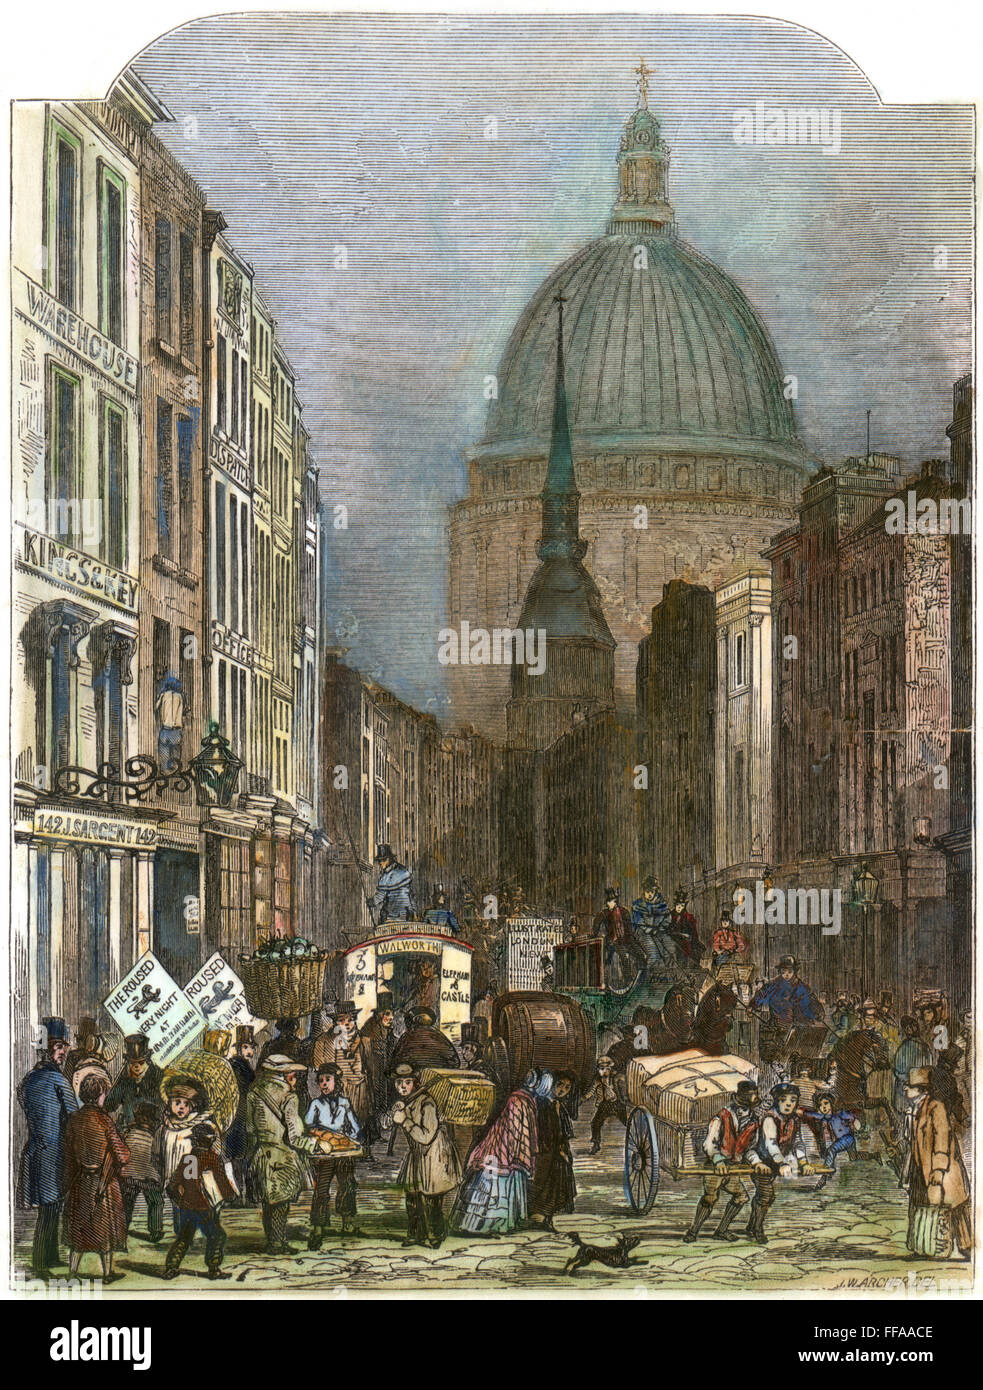 FLEET STREET, LONDON, 1848. /nLooking towards St. Paul's Cathedral. Line engraving, 1848. Stock Photo